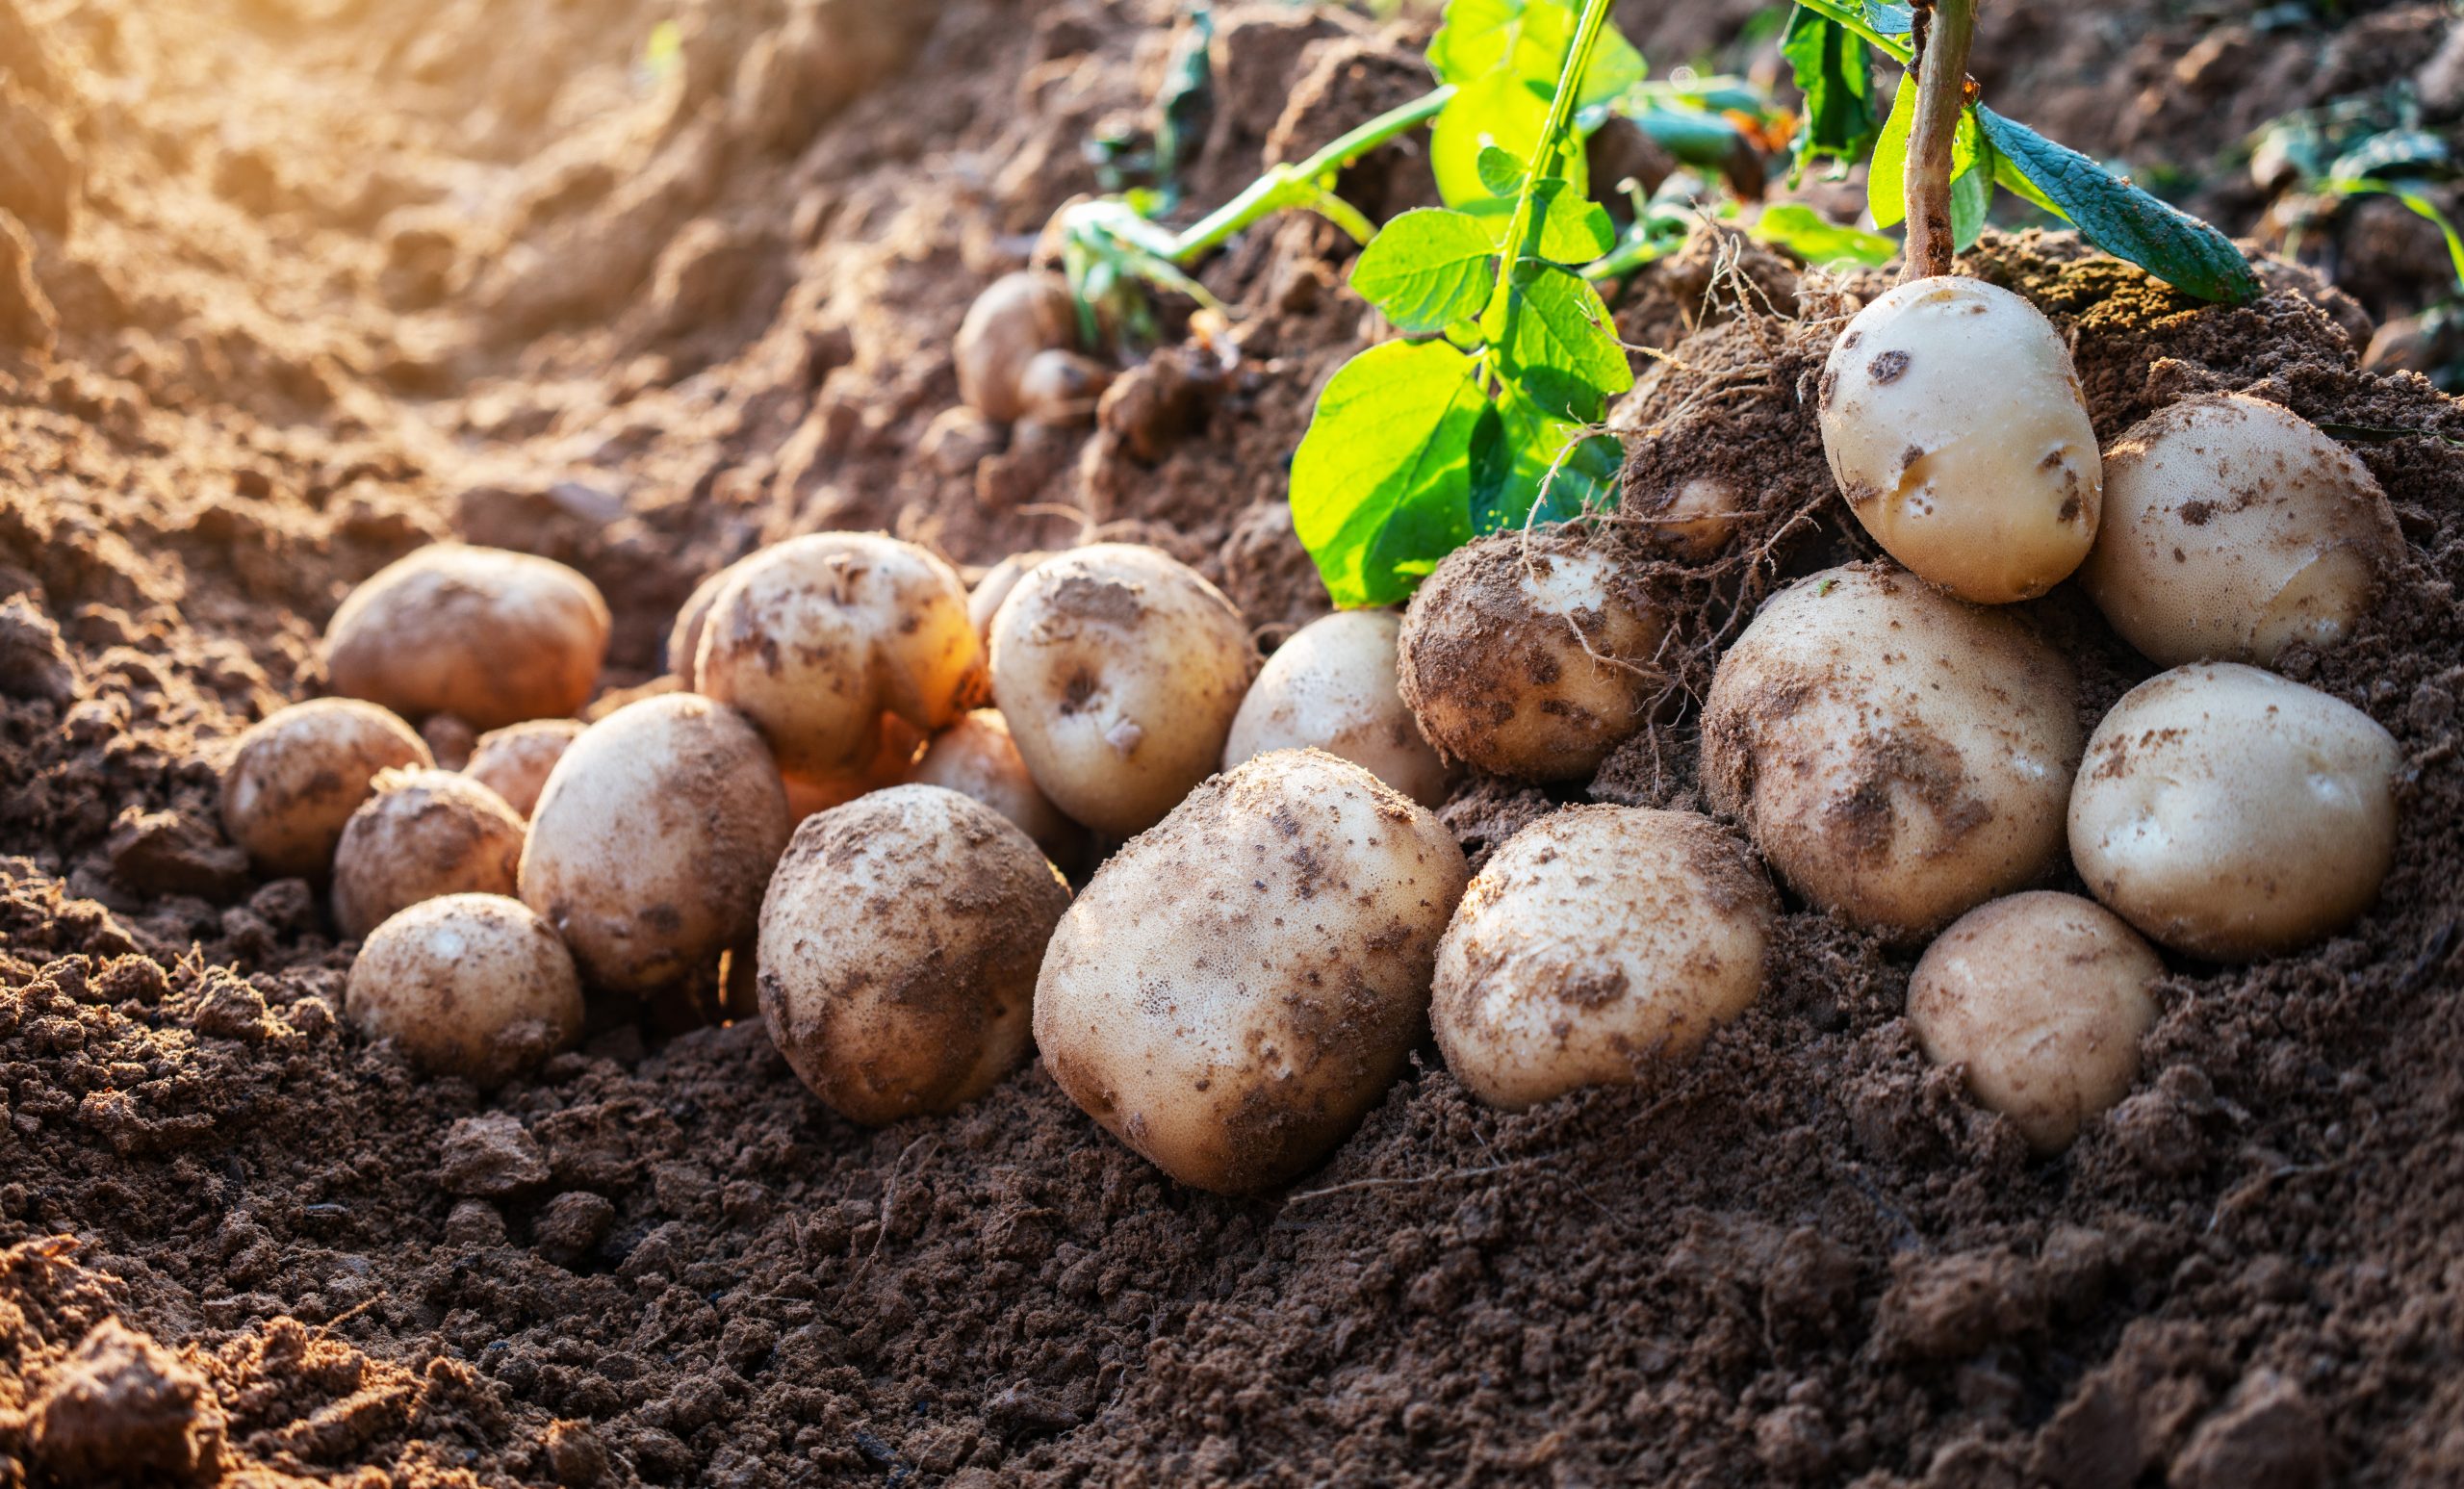 THE STORY OF POTATOES – WHY DOES GENETIC DIVERSITY MATTER?